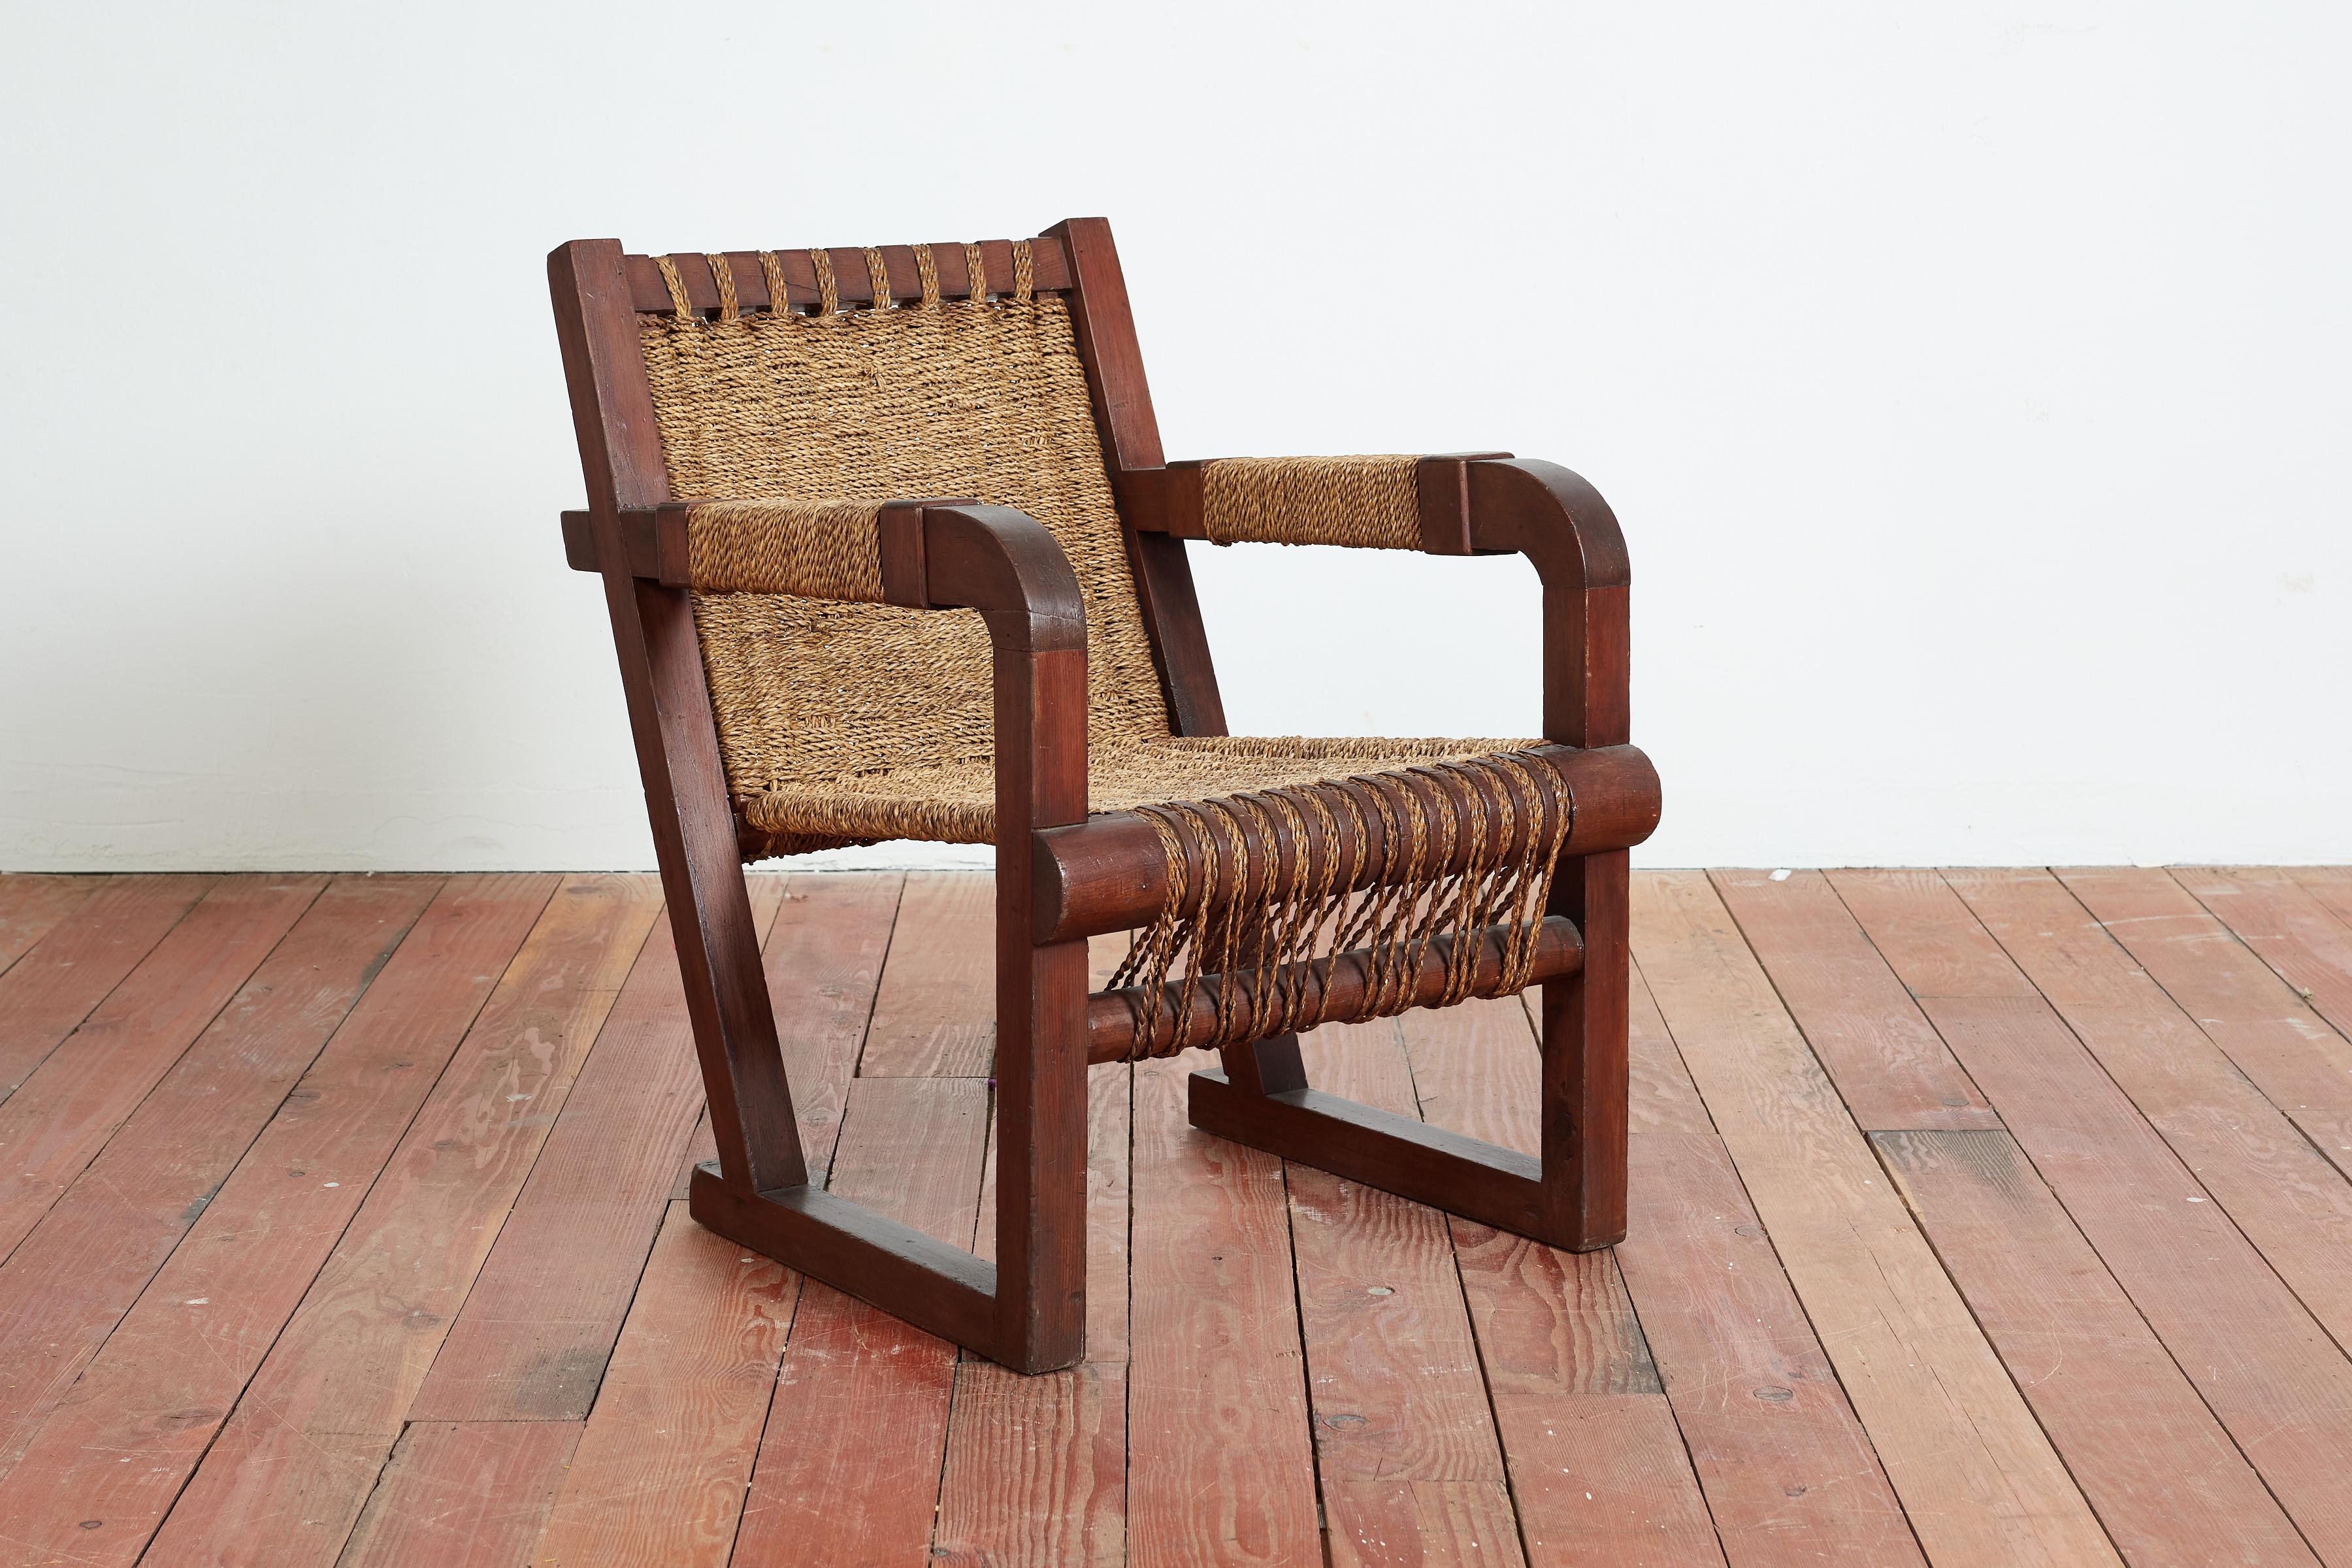 Francis Jourdain chair with incredible woven rope seat, back and arms. 
Great from every angle with wonderful patina.

France, 1940s. 